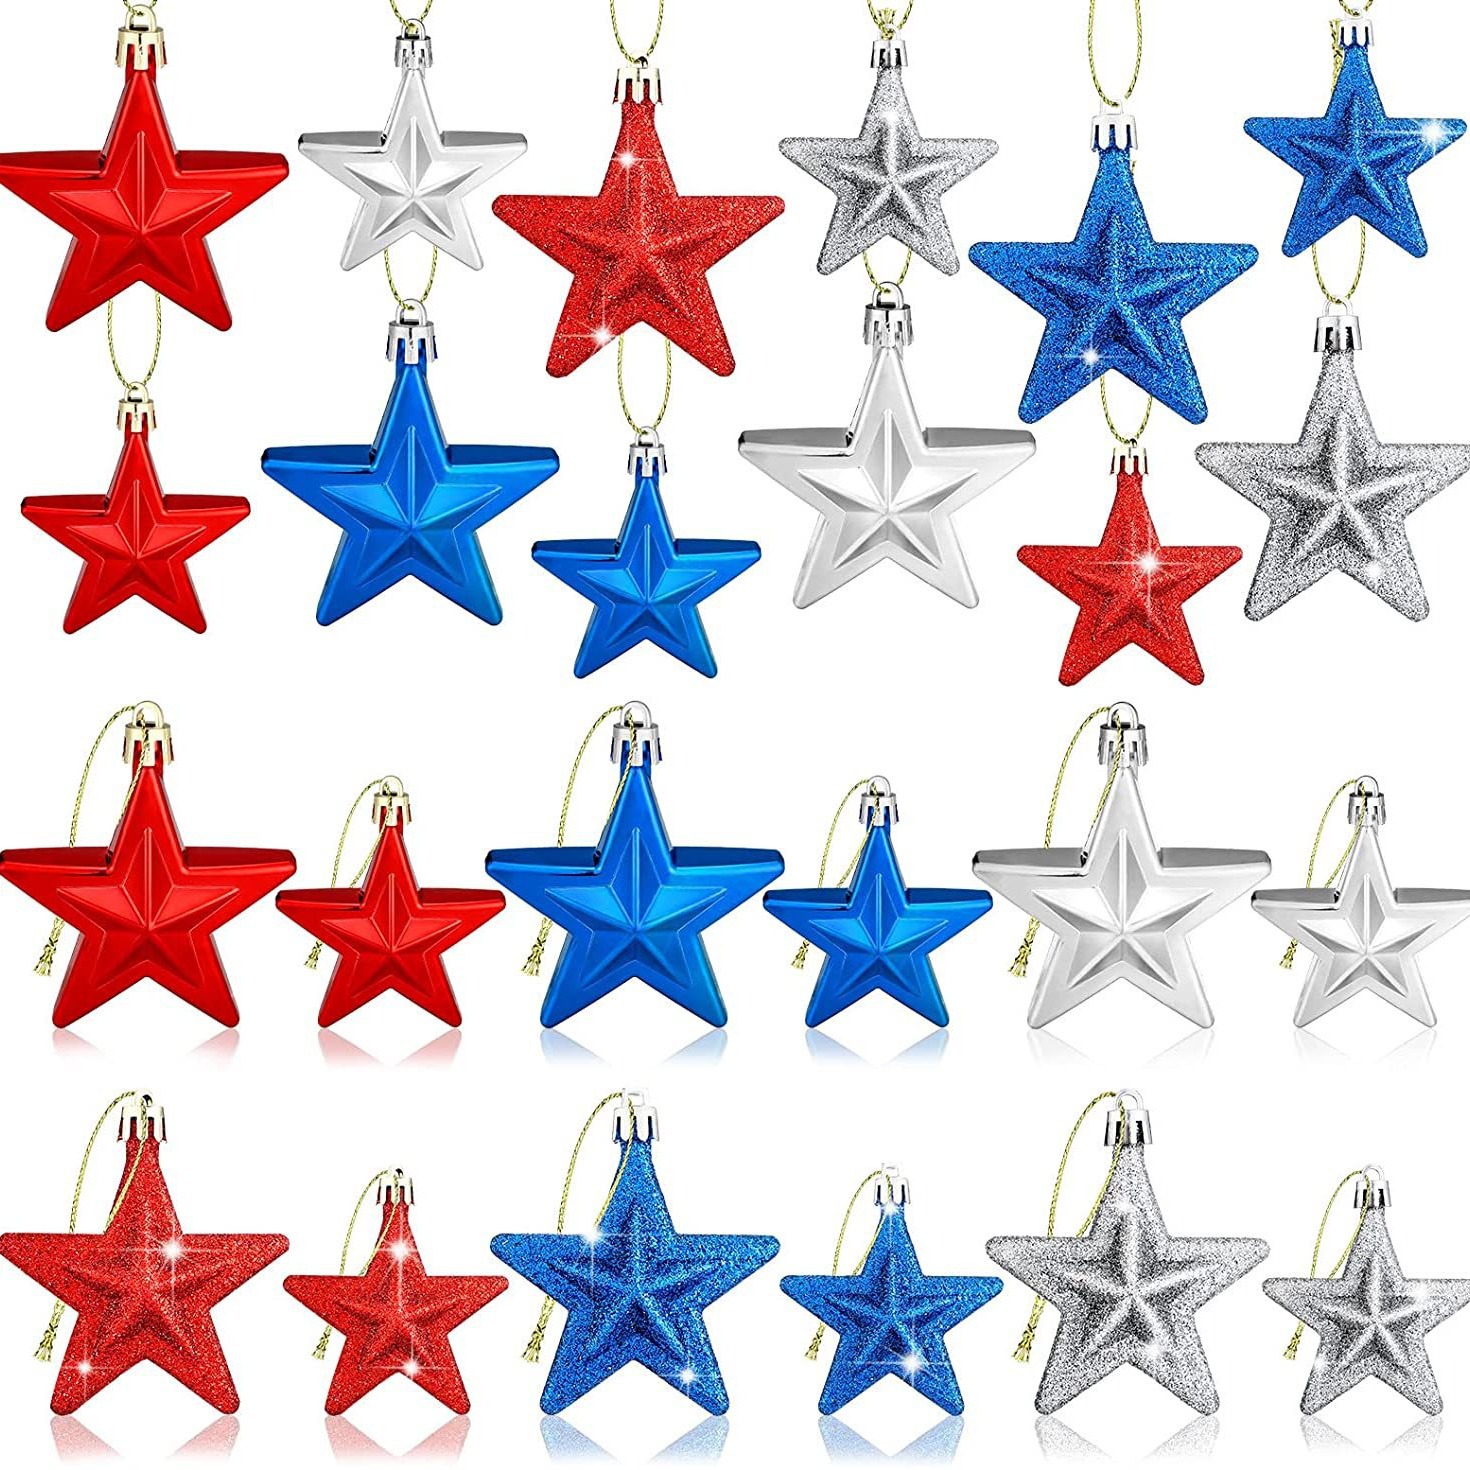 American Independence Day Patriotic Ball 7cm Three-Dimensional Christmas Five-Pointed Star Labor Day Party Christmas Tree Decorative Small Pendant